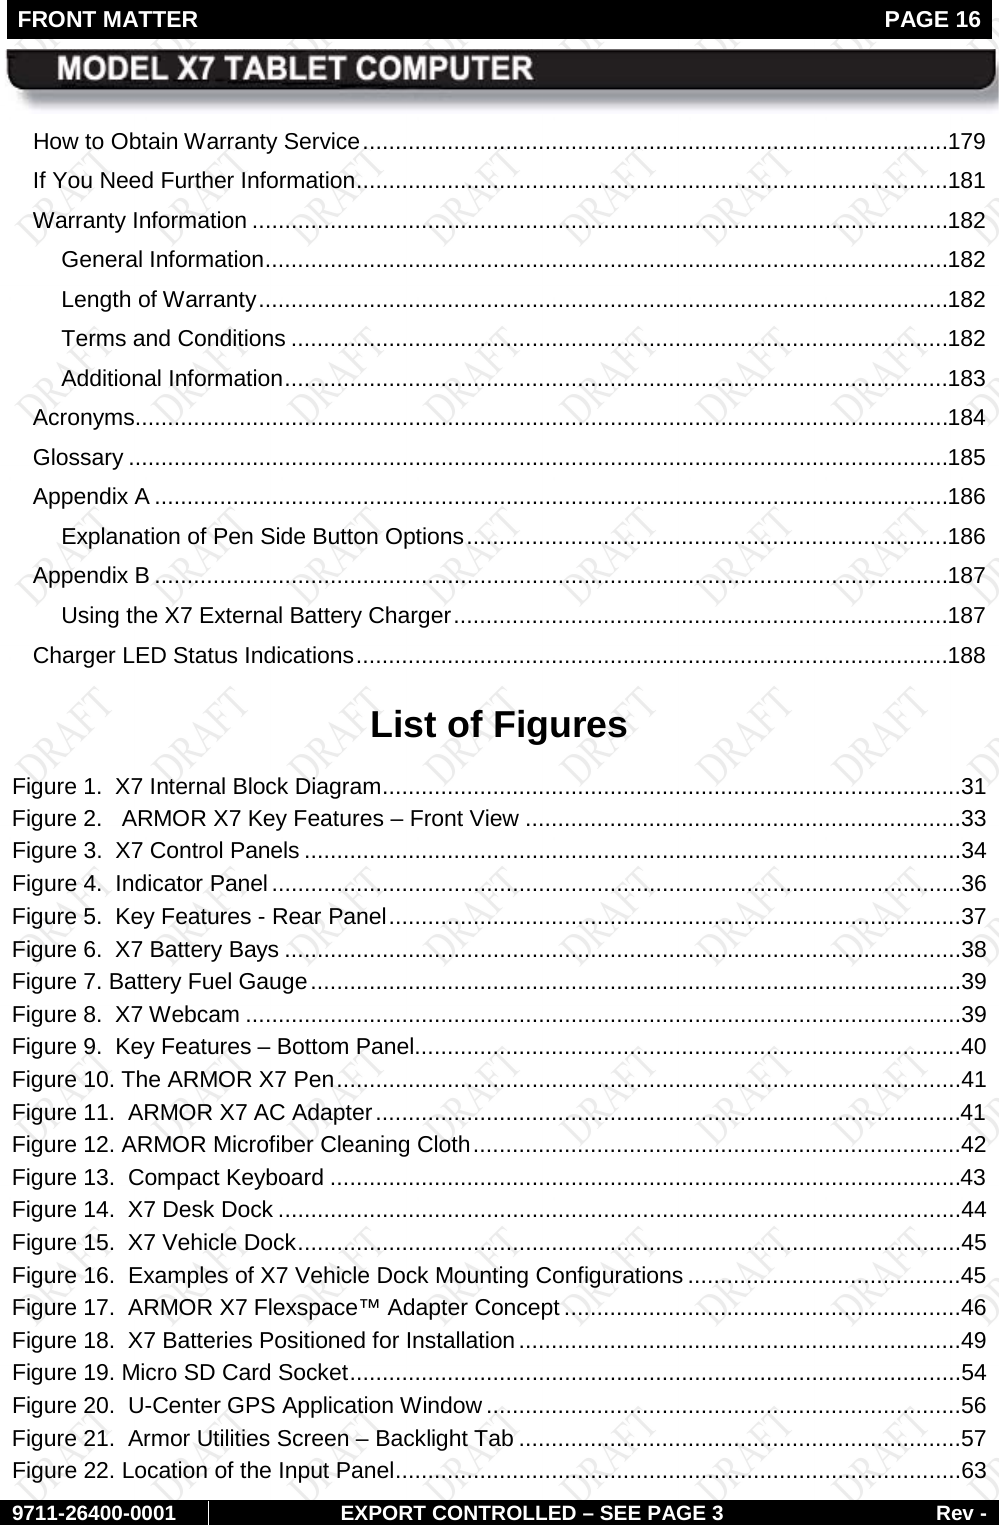 FRONT MATTER   PAGE 16        9711-26400-0001 EXPORT CONTROLLED – SEE PAGE 3 Rev - How to Obtain Warranty Service .......................................................................................... 179 If You Need Further Information ........................................................................................... 181 Warranty Information ........................................................................................................... 182 General Information ......................................................................................................... 182 Length of Warranty .......................................................................................................... 182 Terms and Conditions ..................................................................................................... 182 Additional Information ...................................................................................................... 183 Acronyms............................................................................................................................. 184 Glossary .............................................................................................................................. 185 Appendix A .......................................................................................................................... 186 Explanation of Pen Side Button Options .......................................................................... 186 Appendix B .......................................................................................................................... 187 Using the X7 External Battery Charger ............................................................................ 187 Charger LED Status Indications ........................................................................................... 188 List of Figures Figure 1.  X7 Internal Block Diagram .........................................................................................31 Figure 2.   ARMOR X7 Key Features – Front View ...................................................................33 Figure 3.  X7 Control Panels .....................................................................................................34 Figure 4.  Indicator Panel ..........................................................................................................36 Figure 5.  Key Features - Rear Panel ........................................................................................37 Figure 6.  X7 Battery Bays ........................................................................................................38 Figure 7. Battery Fuel Gauge ....................................................................................................39 Figure 8.  X7 Webcam ..............................................................................................................39 Figure 9.  Key Features – Bottom Panel....................................................................................40 Figure 10. The ARMOR X7 Pen ................................................................................................41 Figure 11.  ARMOR X7 AC Adapter ..........................................................................................41 Figure 12. ARMOR Microfiber Cleaning Cloth ...........................................................................42 Figure 13.  Compact Keyboard .................................................................................................43 Figure 14.  X7 Desk Dock .........................................................................................................44 Figure 15.  X7 Vehicle Dock ......................................................................................................45 Figure 16.  Examples of X7 Vehicle Dock Mounting Configurations ..........................................45 Figure 17.  ARMOR X7 Flexspace™ Adapter Concept .............................................................46 Figure 18.  X7 Batteries Positioned for Installation ....................................................................49 Figure 19. Micro SD Card Socket ..............................................................................................54 Figure 20.  U-Center GPS Application Window .........................................................................56 Figure 21.  Armor Utilities Screen – Backlight Tab ....................................................................57 Figure 22. Location of the Input Panel .......................................................................................63 